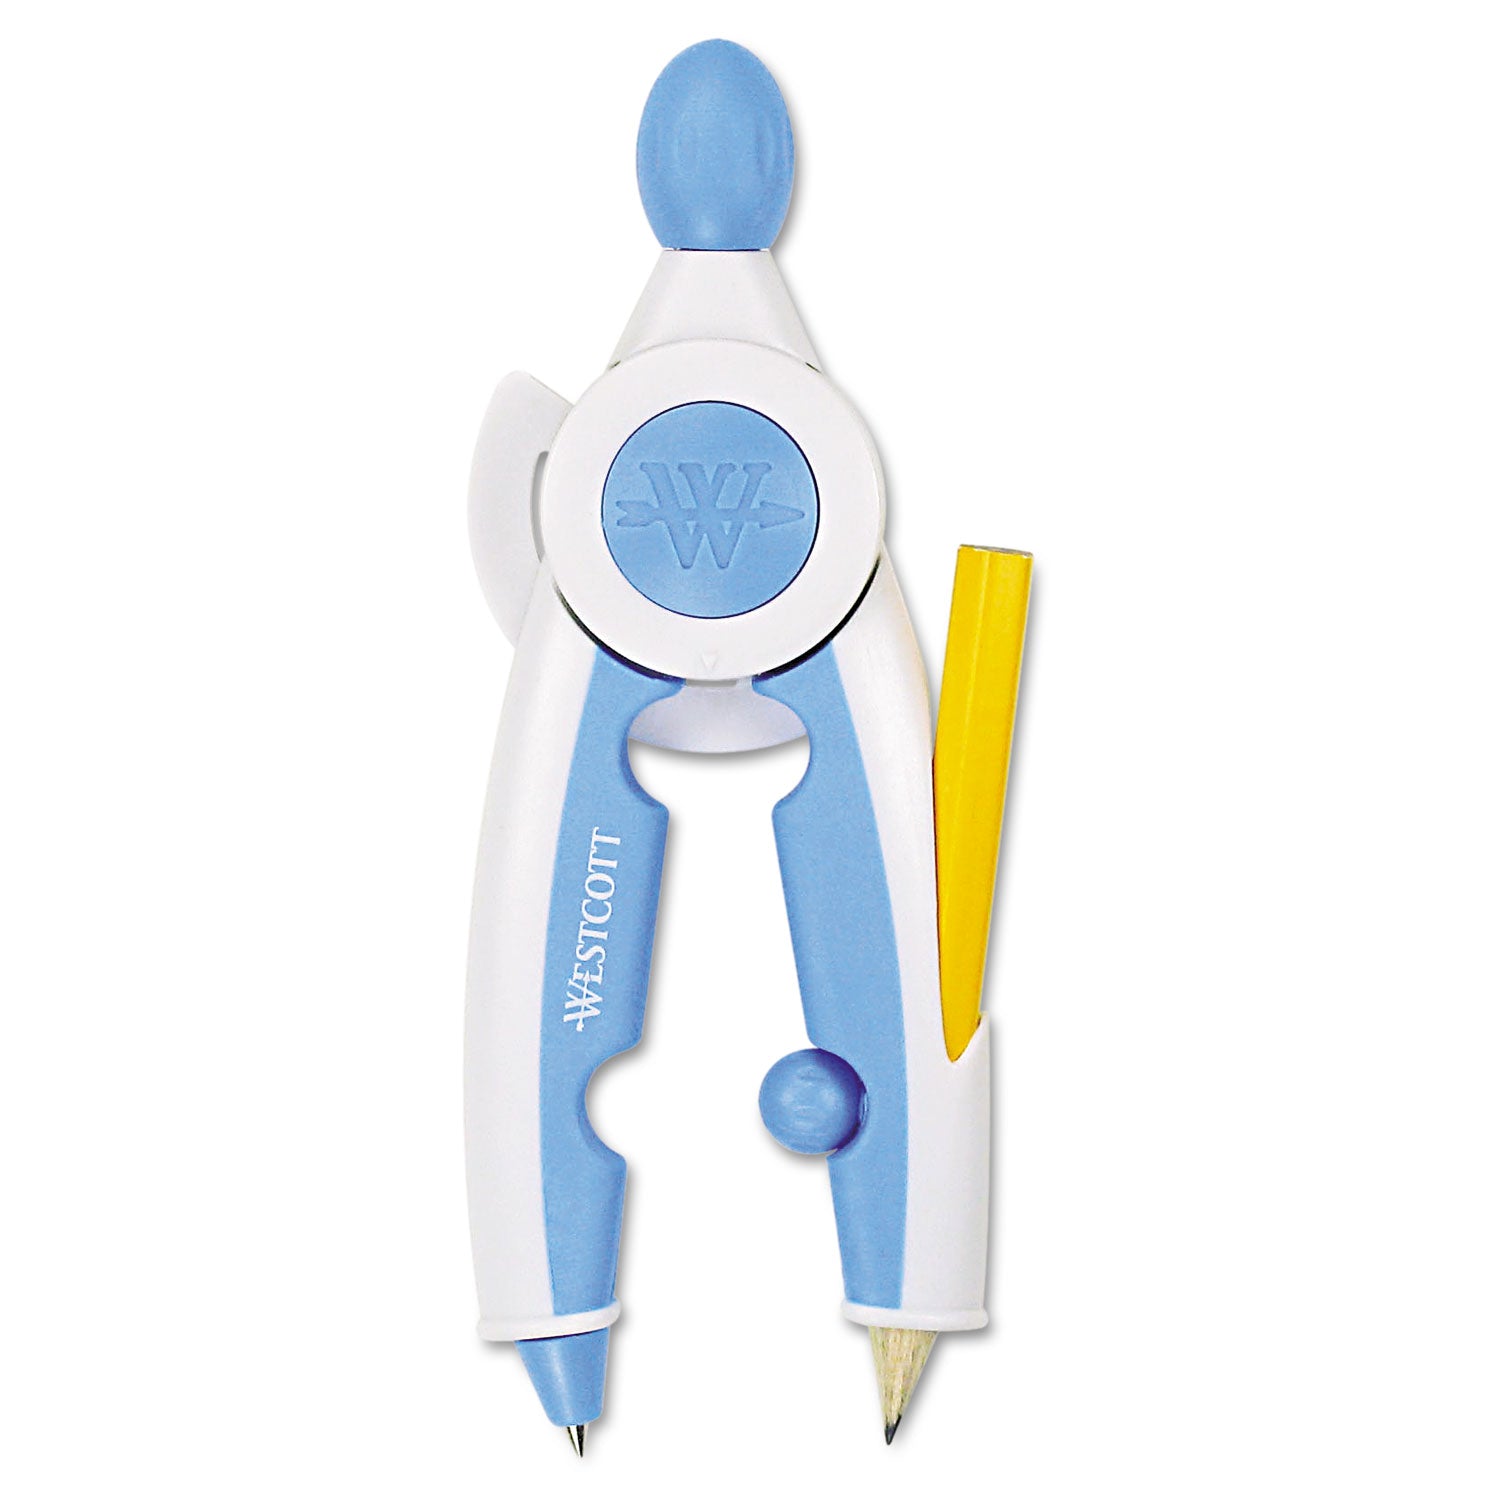 Soft Touch School Compass with Antimicrobial Product Protection, 10", Assorted Colors - 